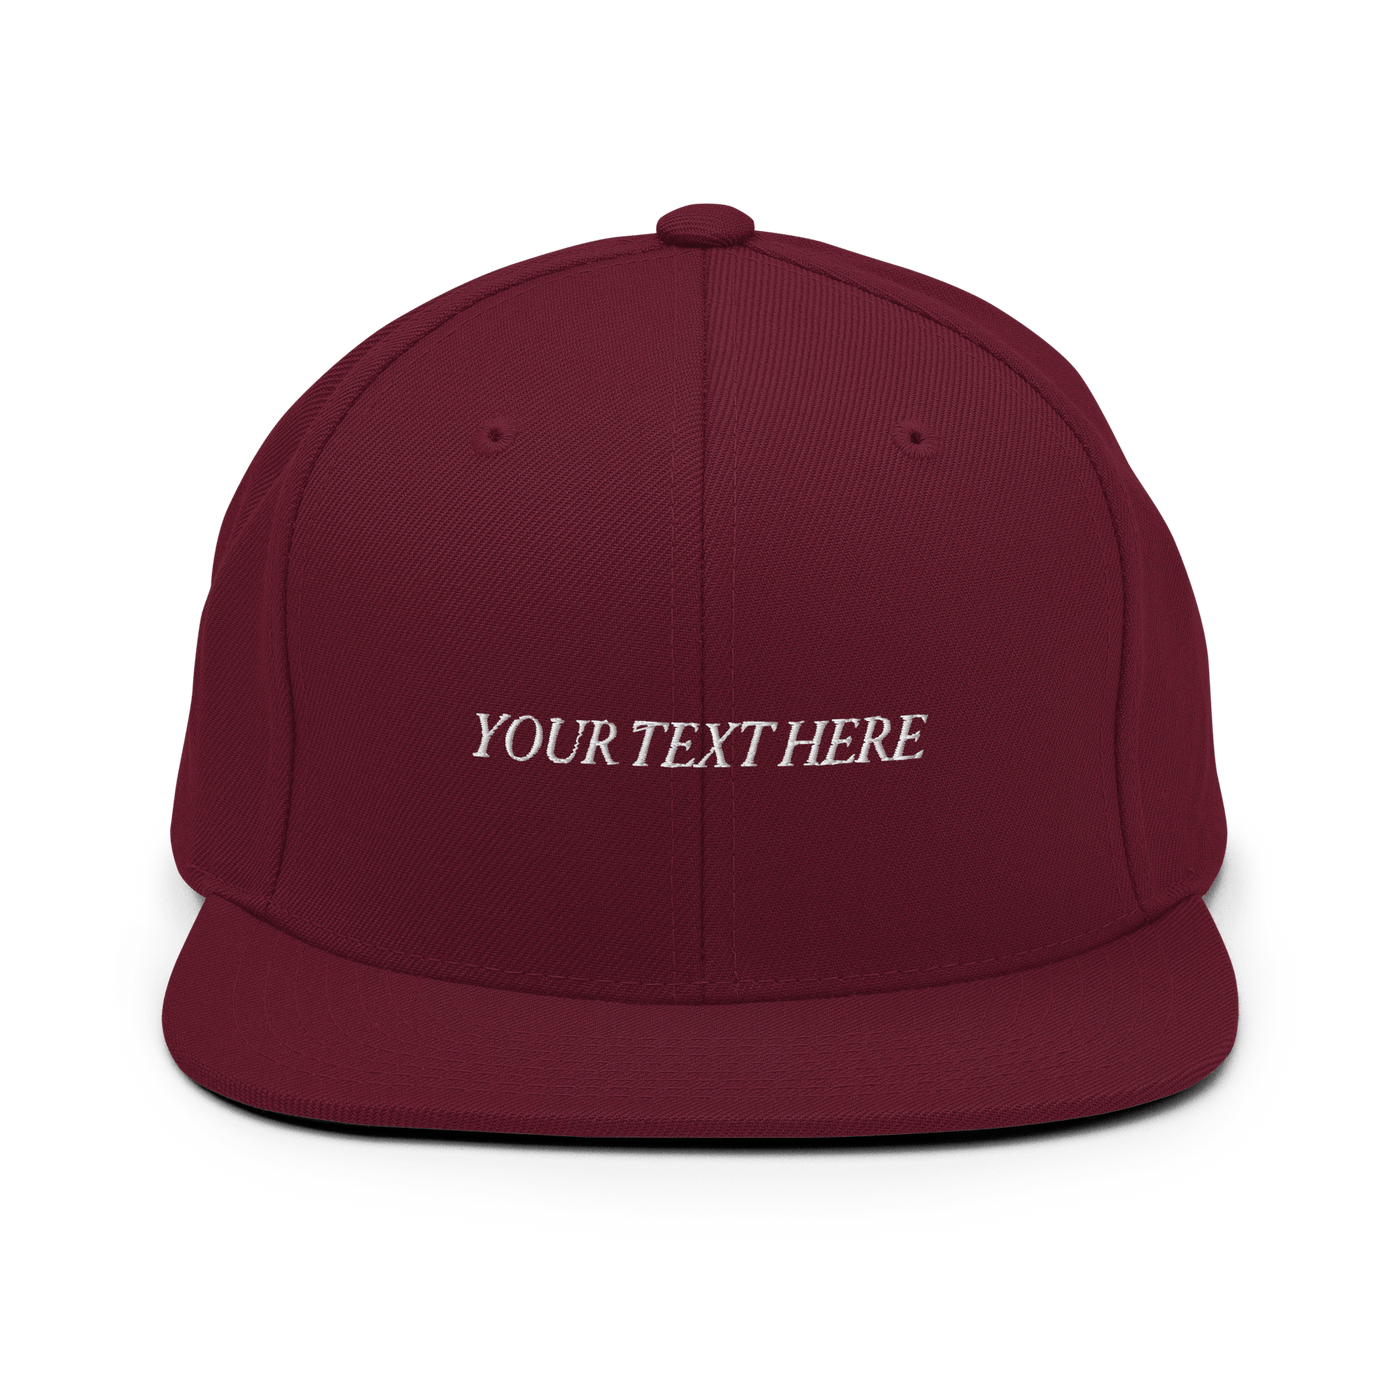 Customize Your Own Snapback Hat - Italic Font - Maroon - - Just Another Cap Store